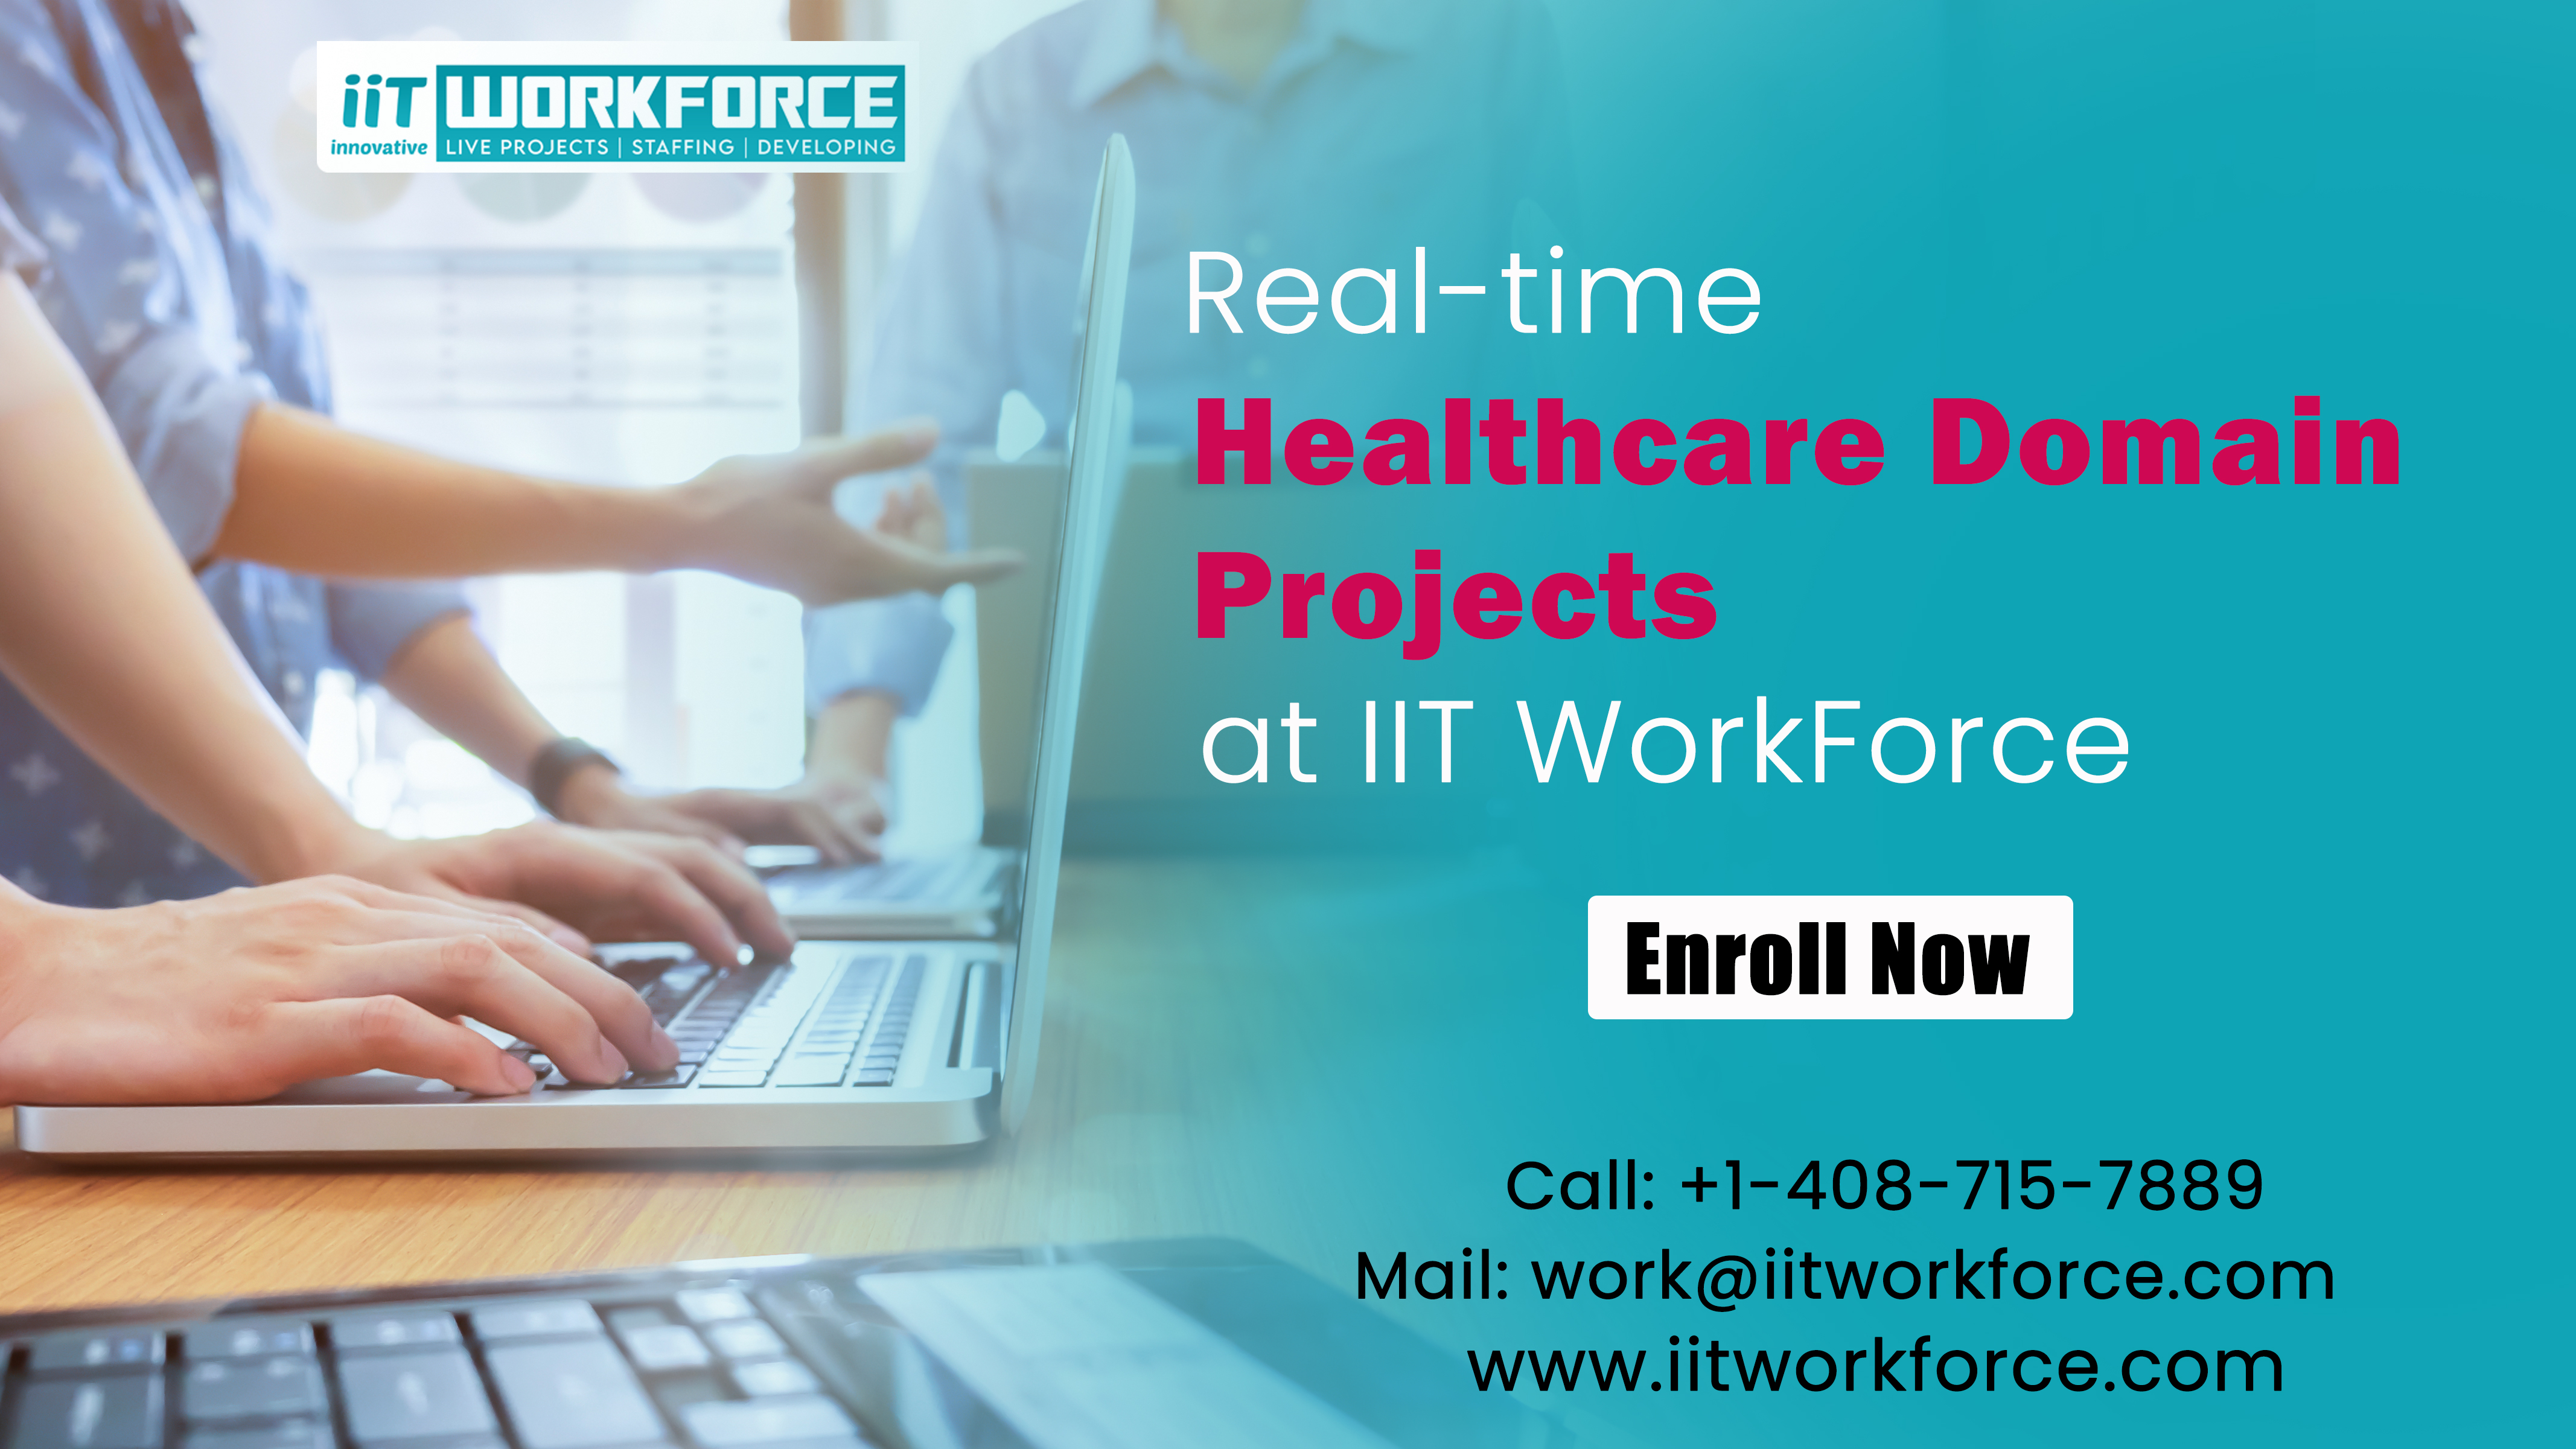 Real-time healthcare domain projects at iiT WorkForce